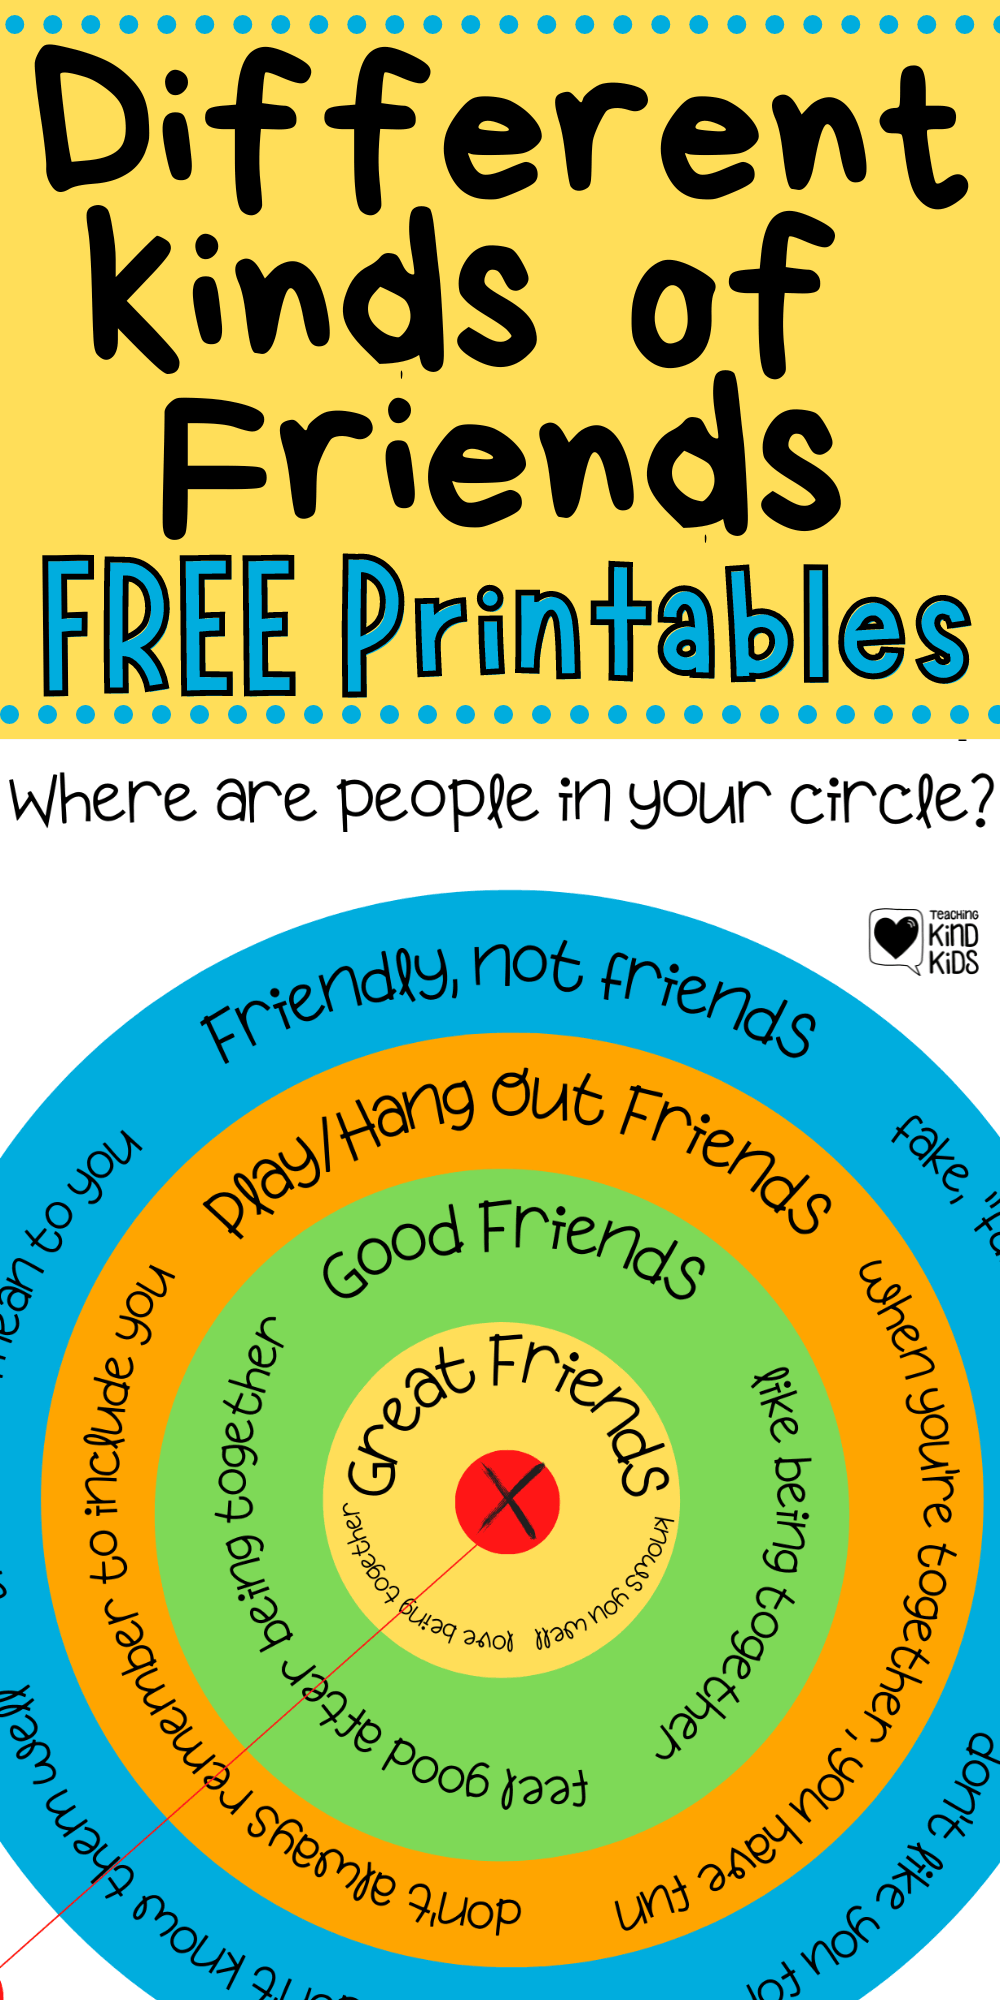 Use this Bullseye Friendship printable to help explain different kinds of friends and different kinds of friendships to kids so they set clear, healthy boundaries.